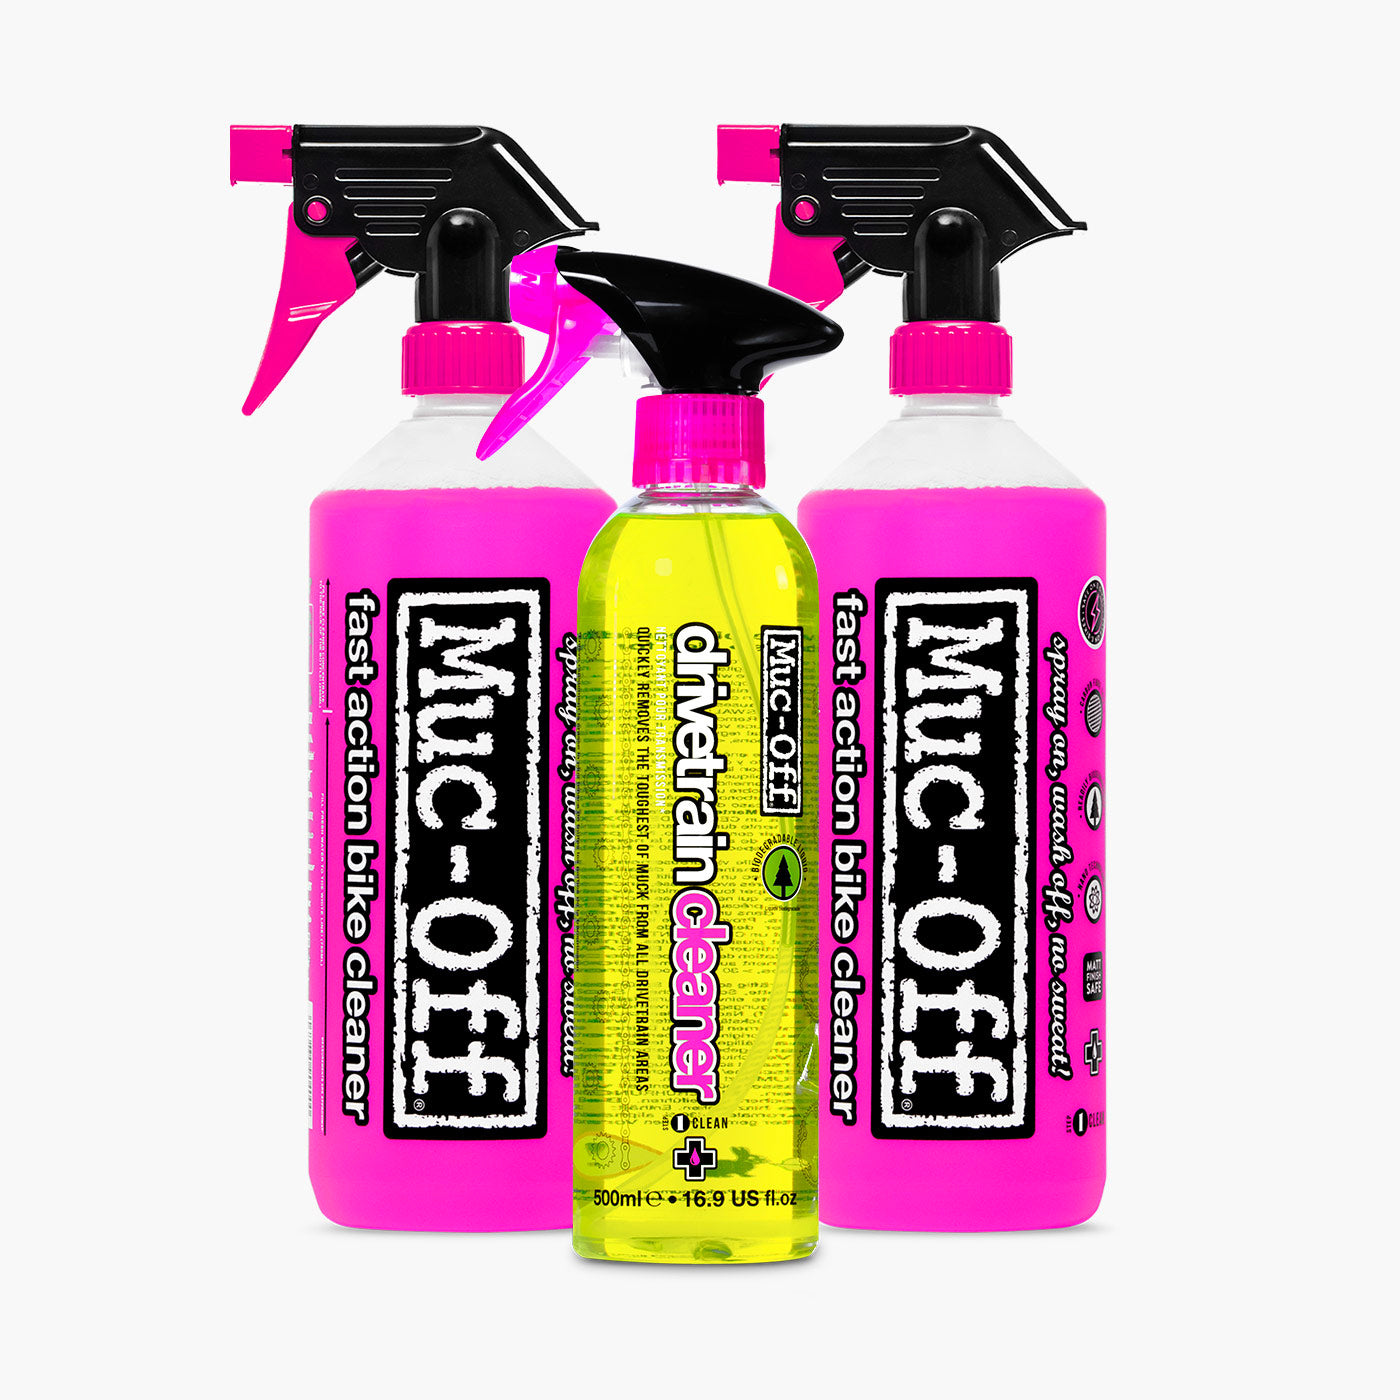 Cleaning my bike chain with the Muc-off X-1 chain cleaner - Don